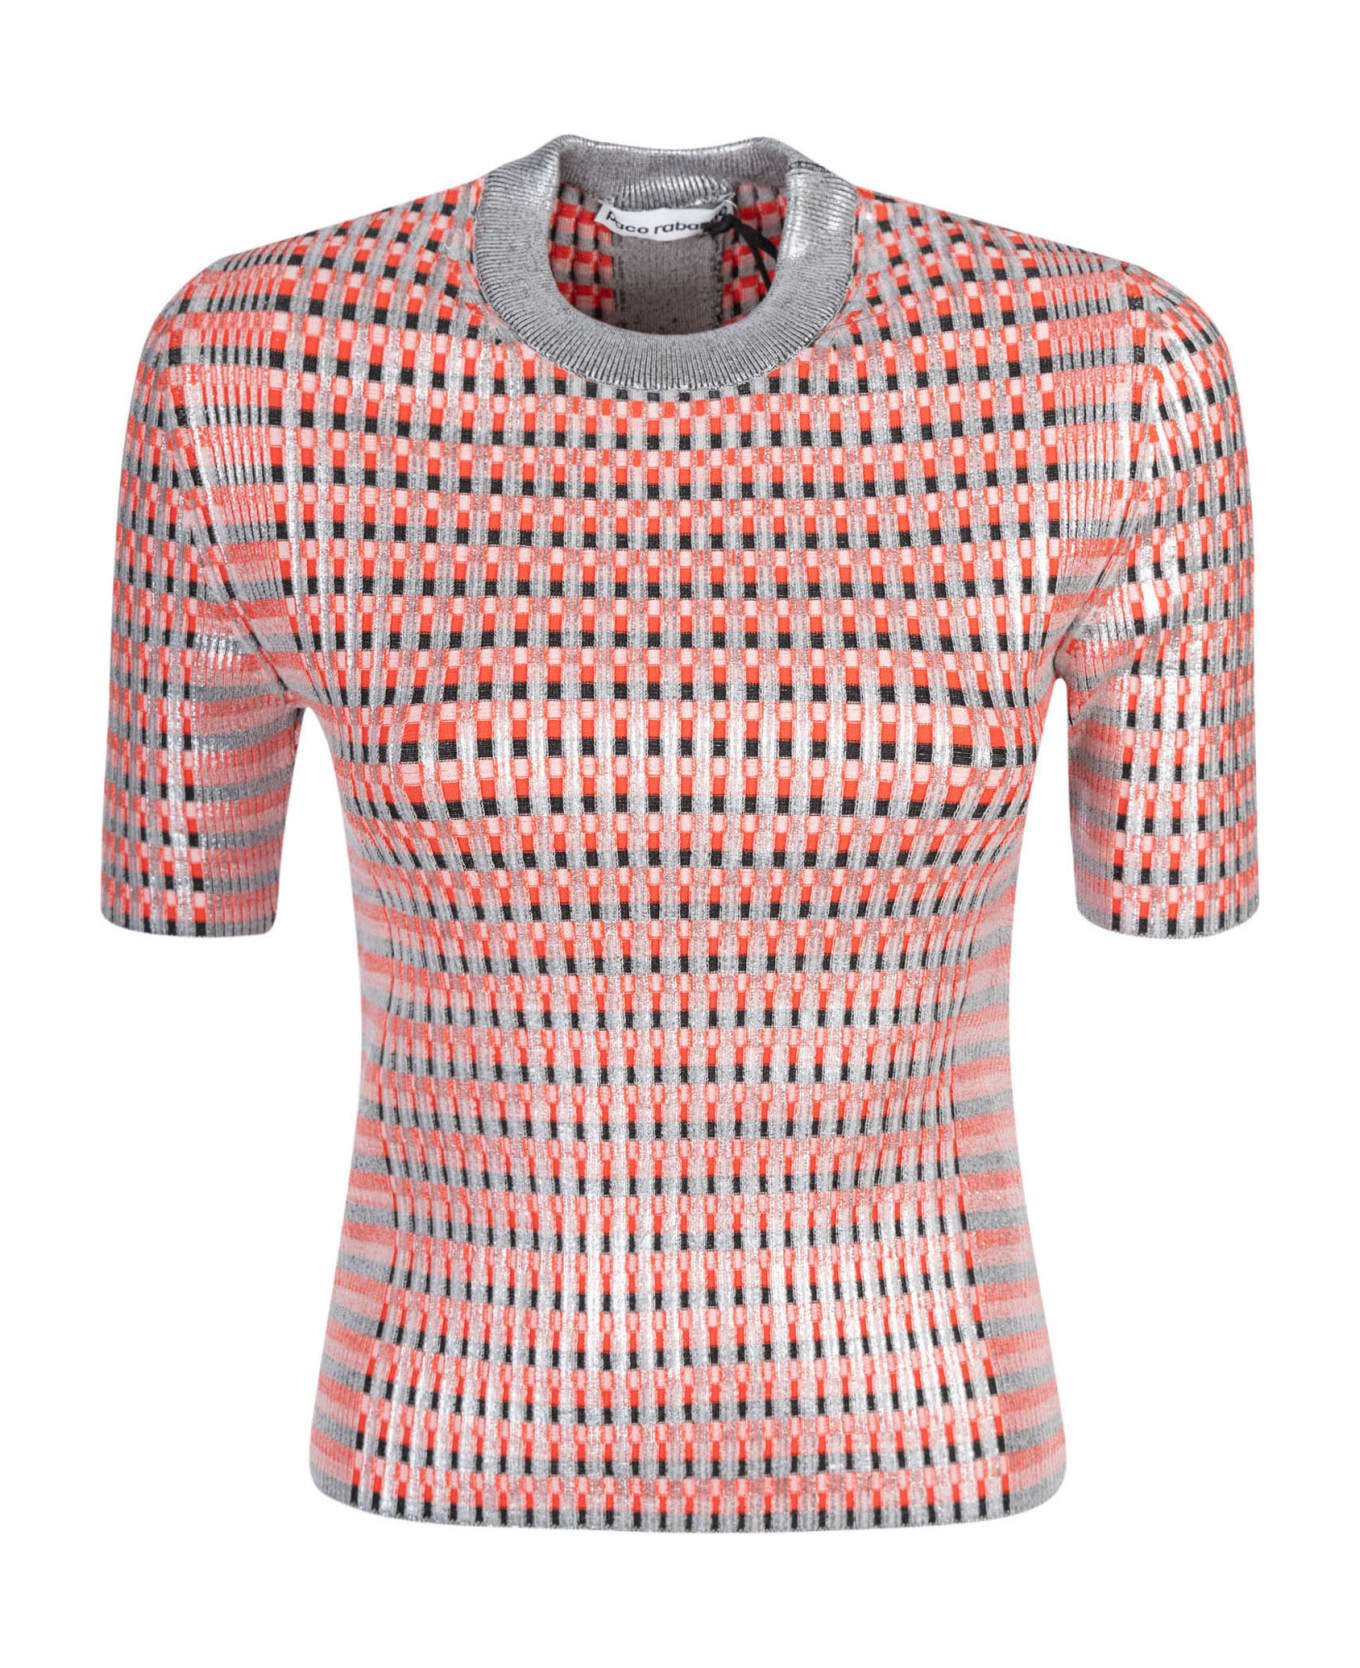 Paco Rabanne Laminated Mesh Top - Multicolor